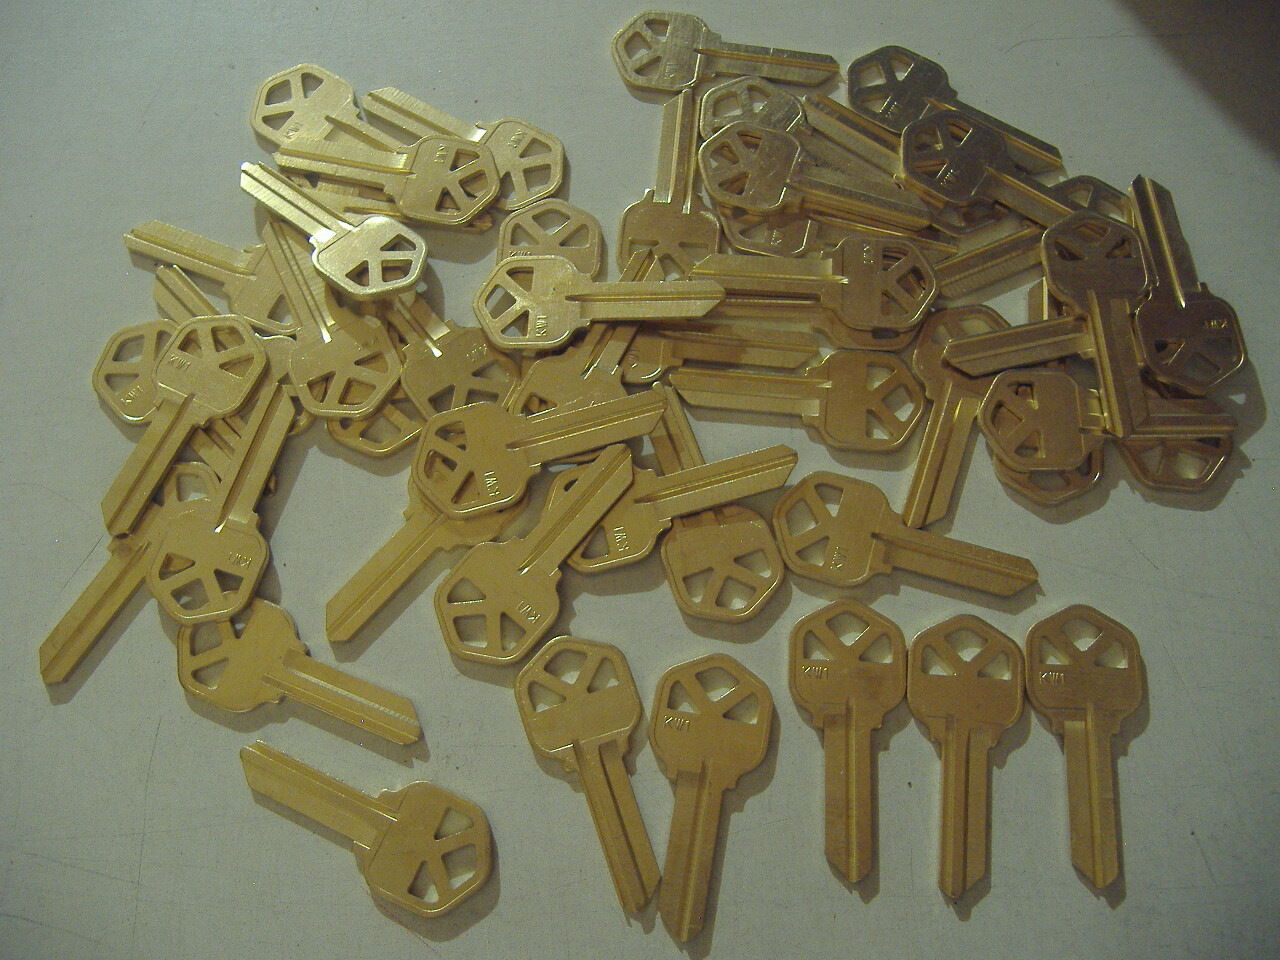 FIFTY LOCKSMITH SOLID BRASS KW1 KEY BLANKS FITS KWIKSET MADE IN USA  50   